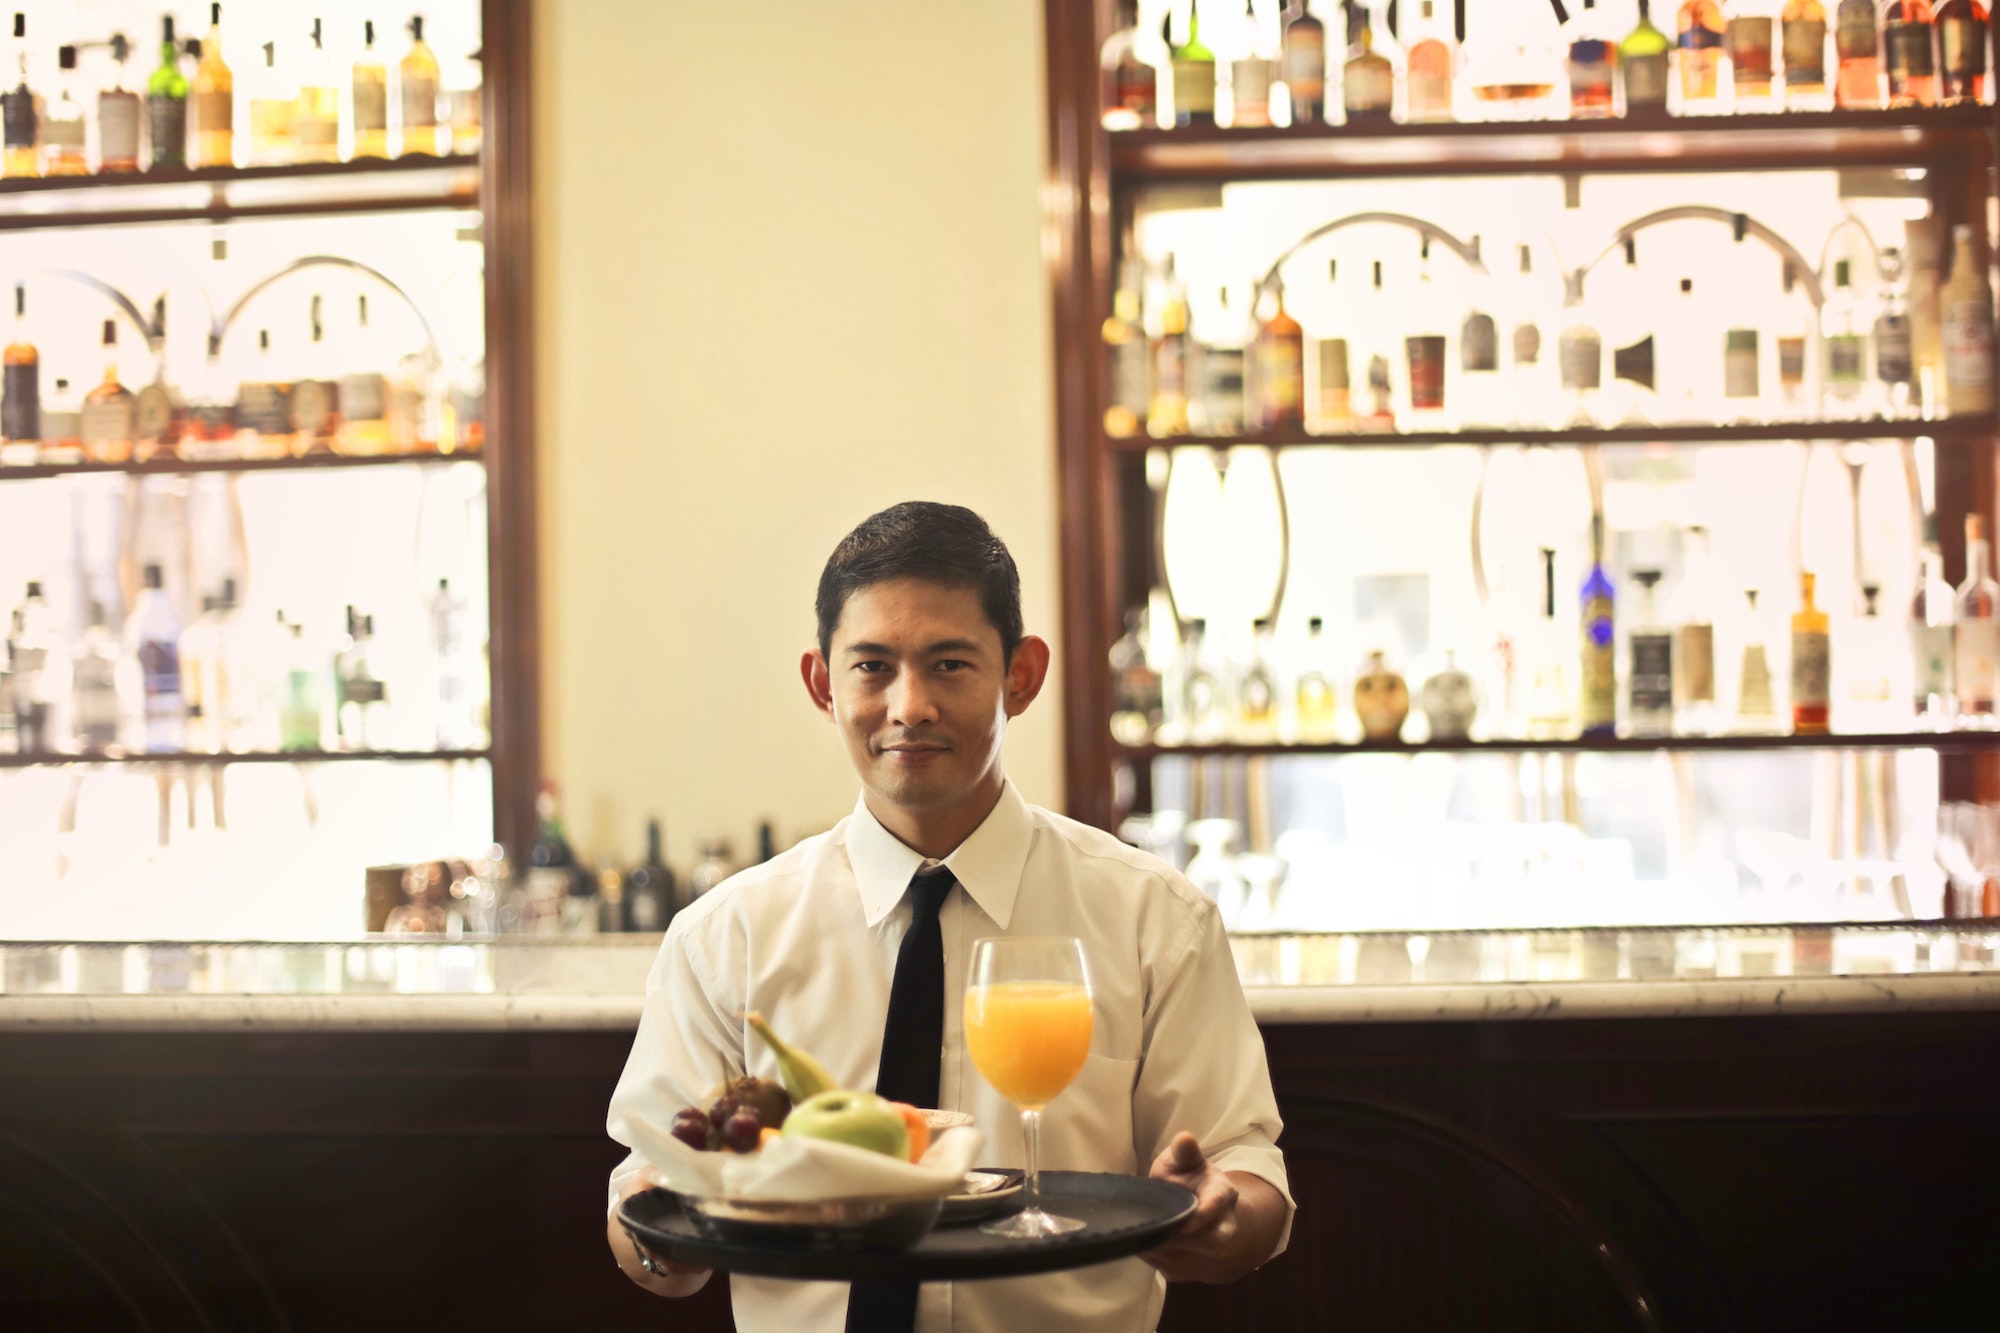 An engaged customer through quality waitstaff service could potentially result in profit